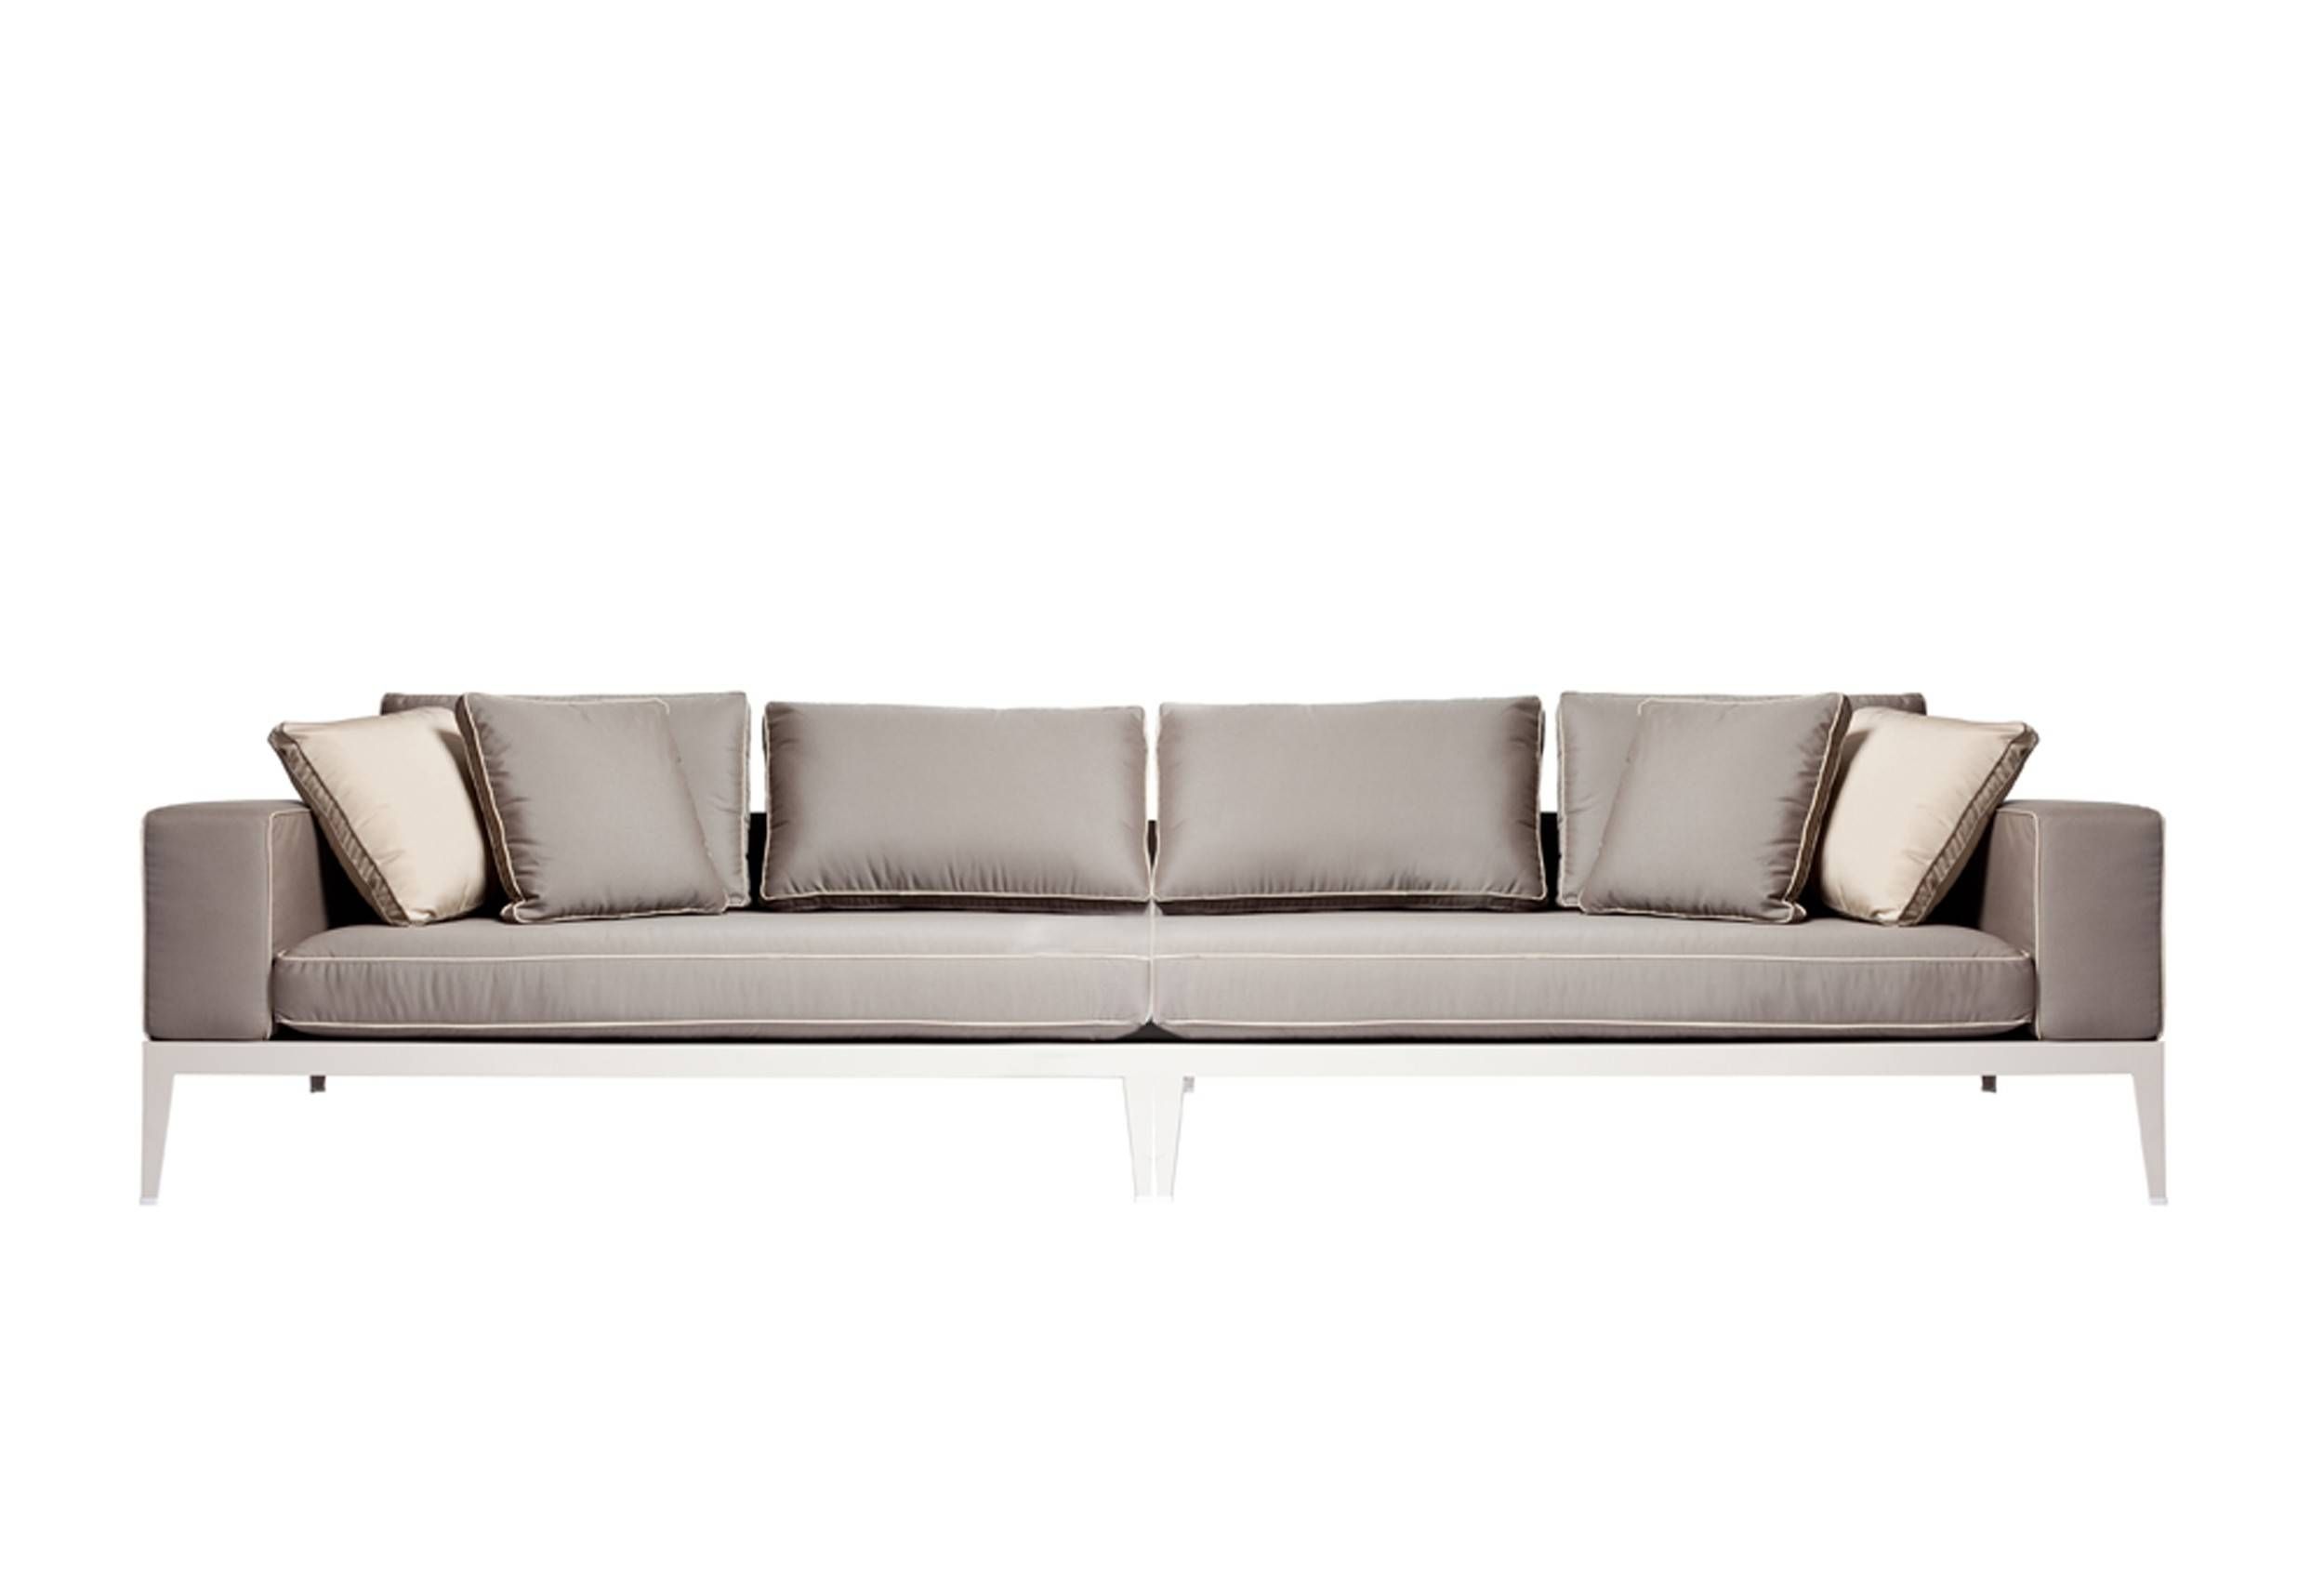 Balmoral 4 Seater Sofa | Viesso For 4 Seater Sofas (View 1 of 30)